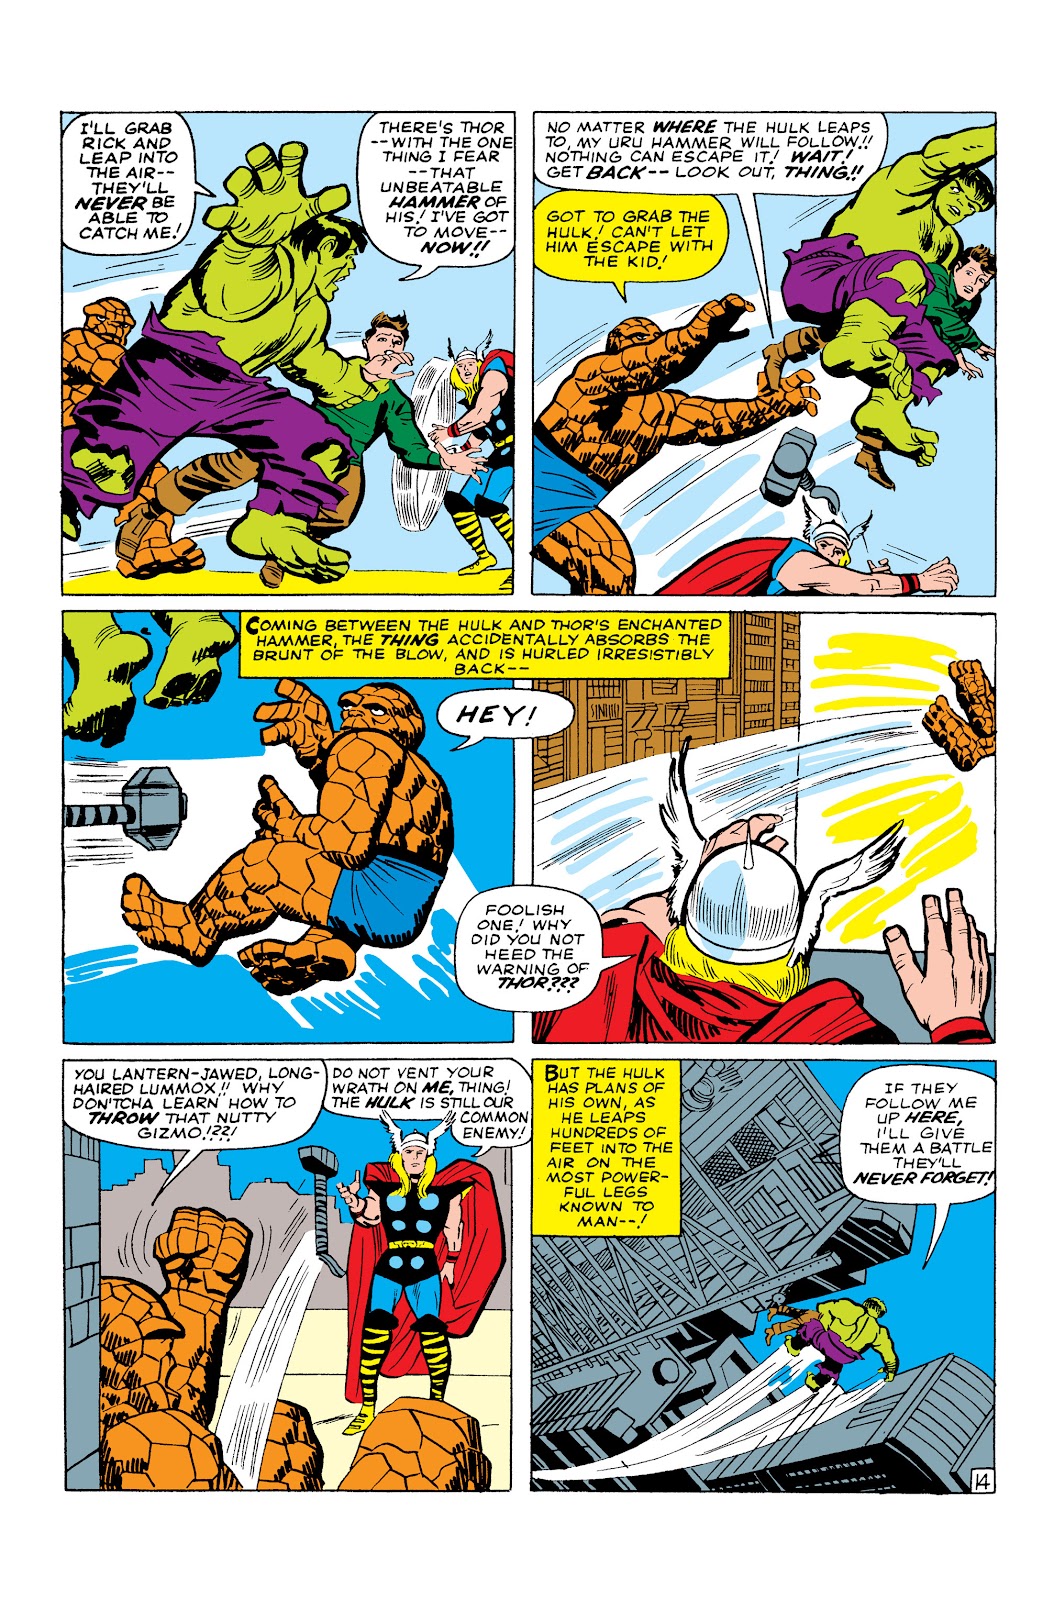 Read online Marvel Masterworks: The Fantastic Four comic - Issue # TPB 3 (Part 2) - 34